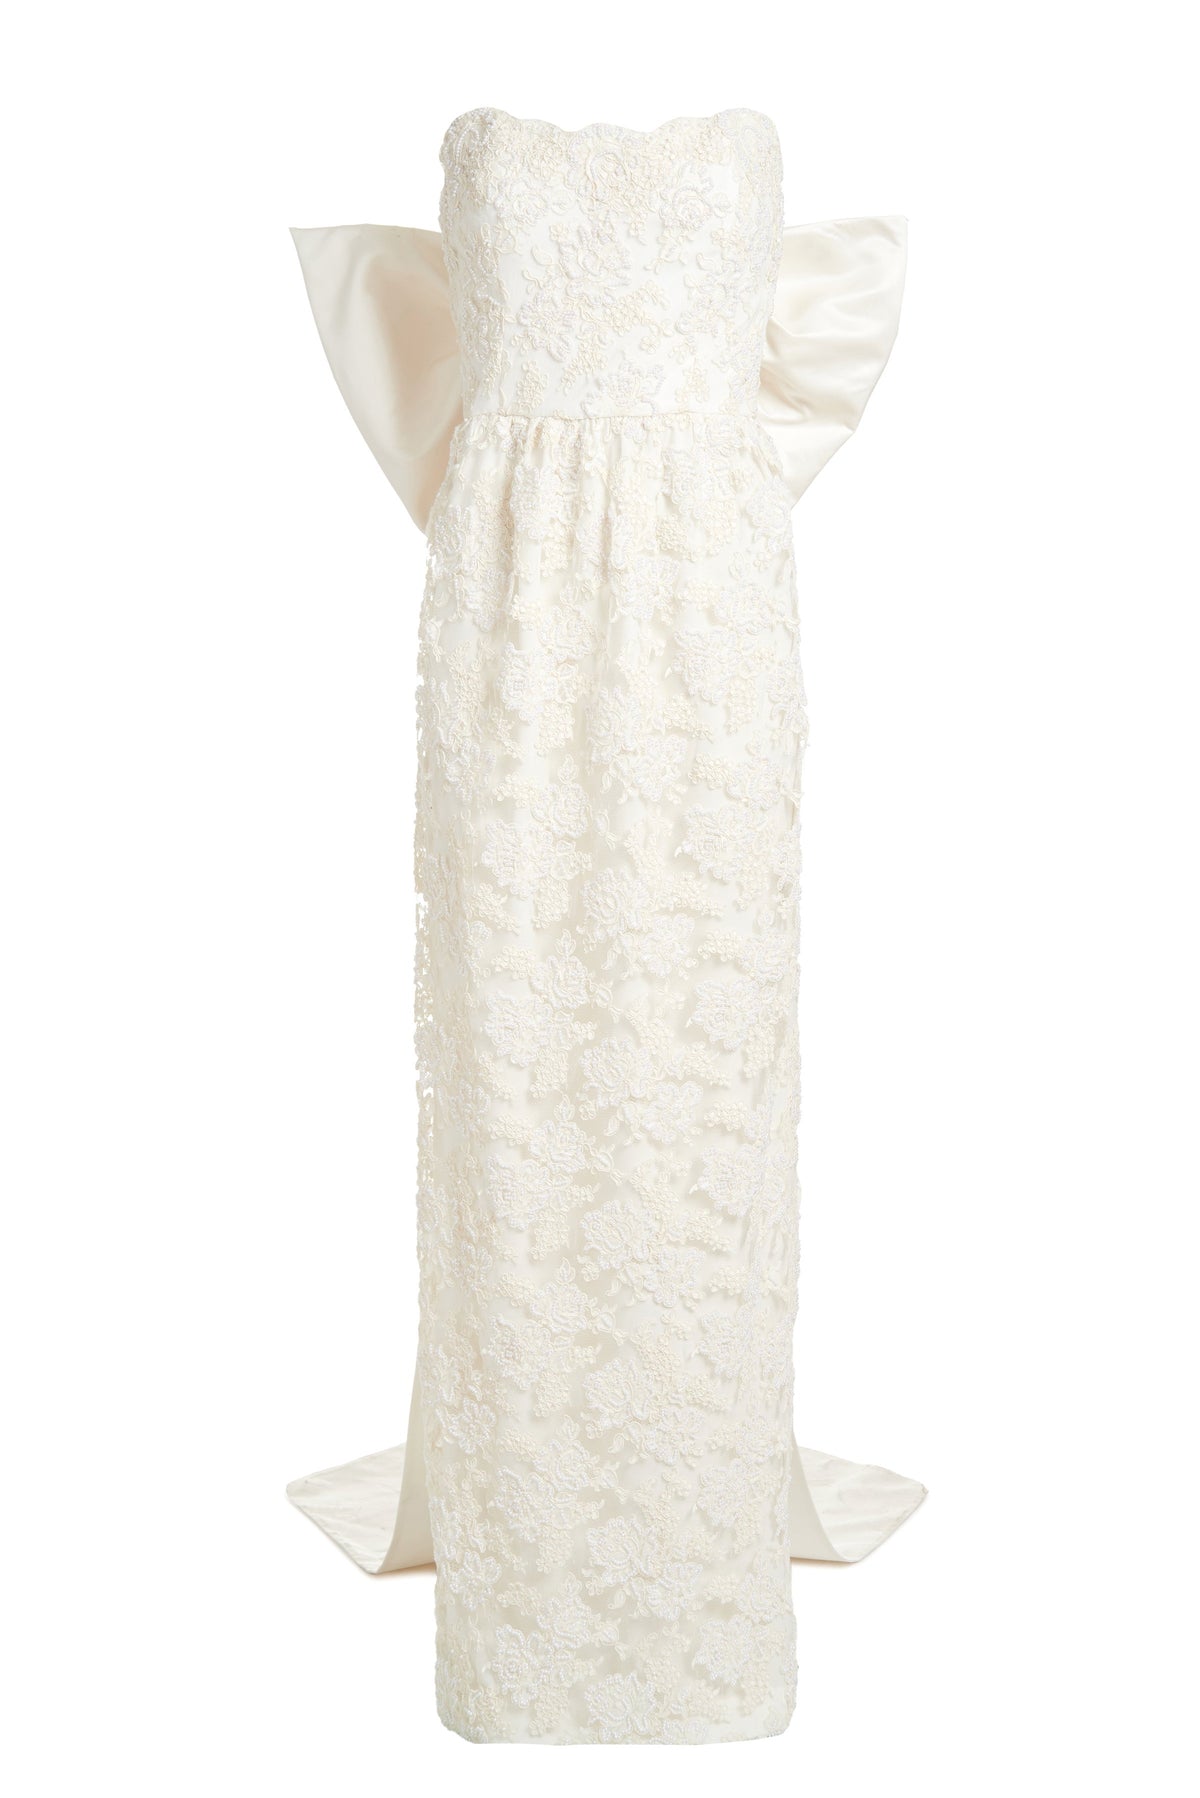 Evora Pearl Beaded Lace Gown with Large Detachable Bow